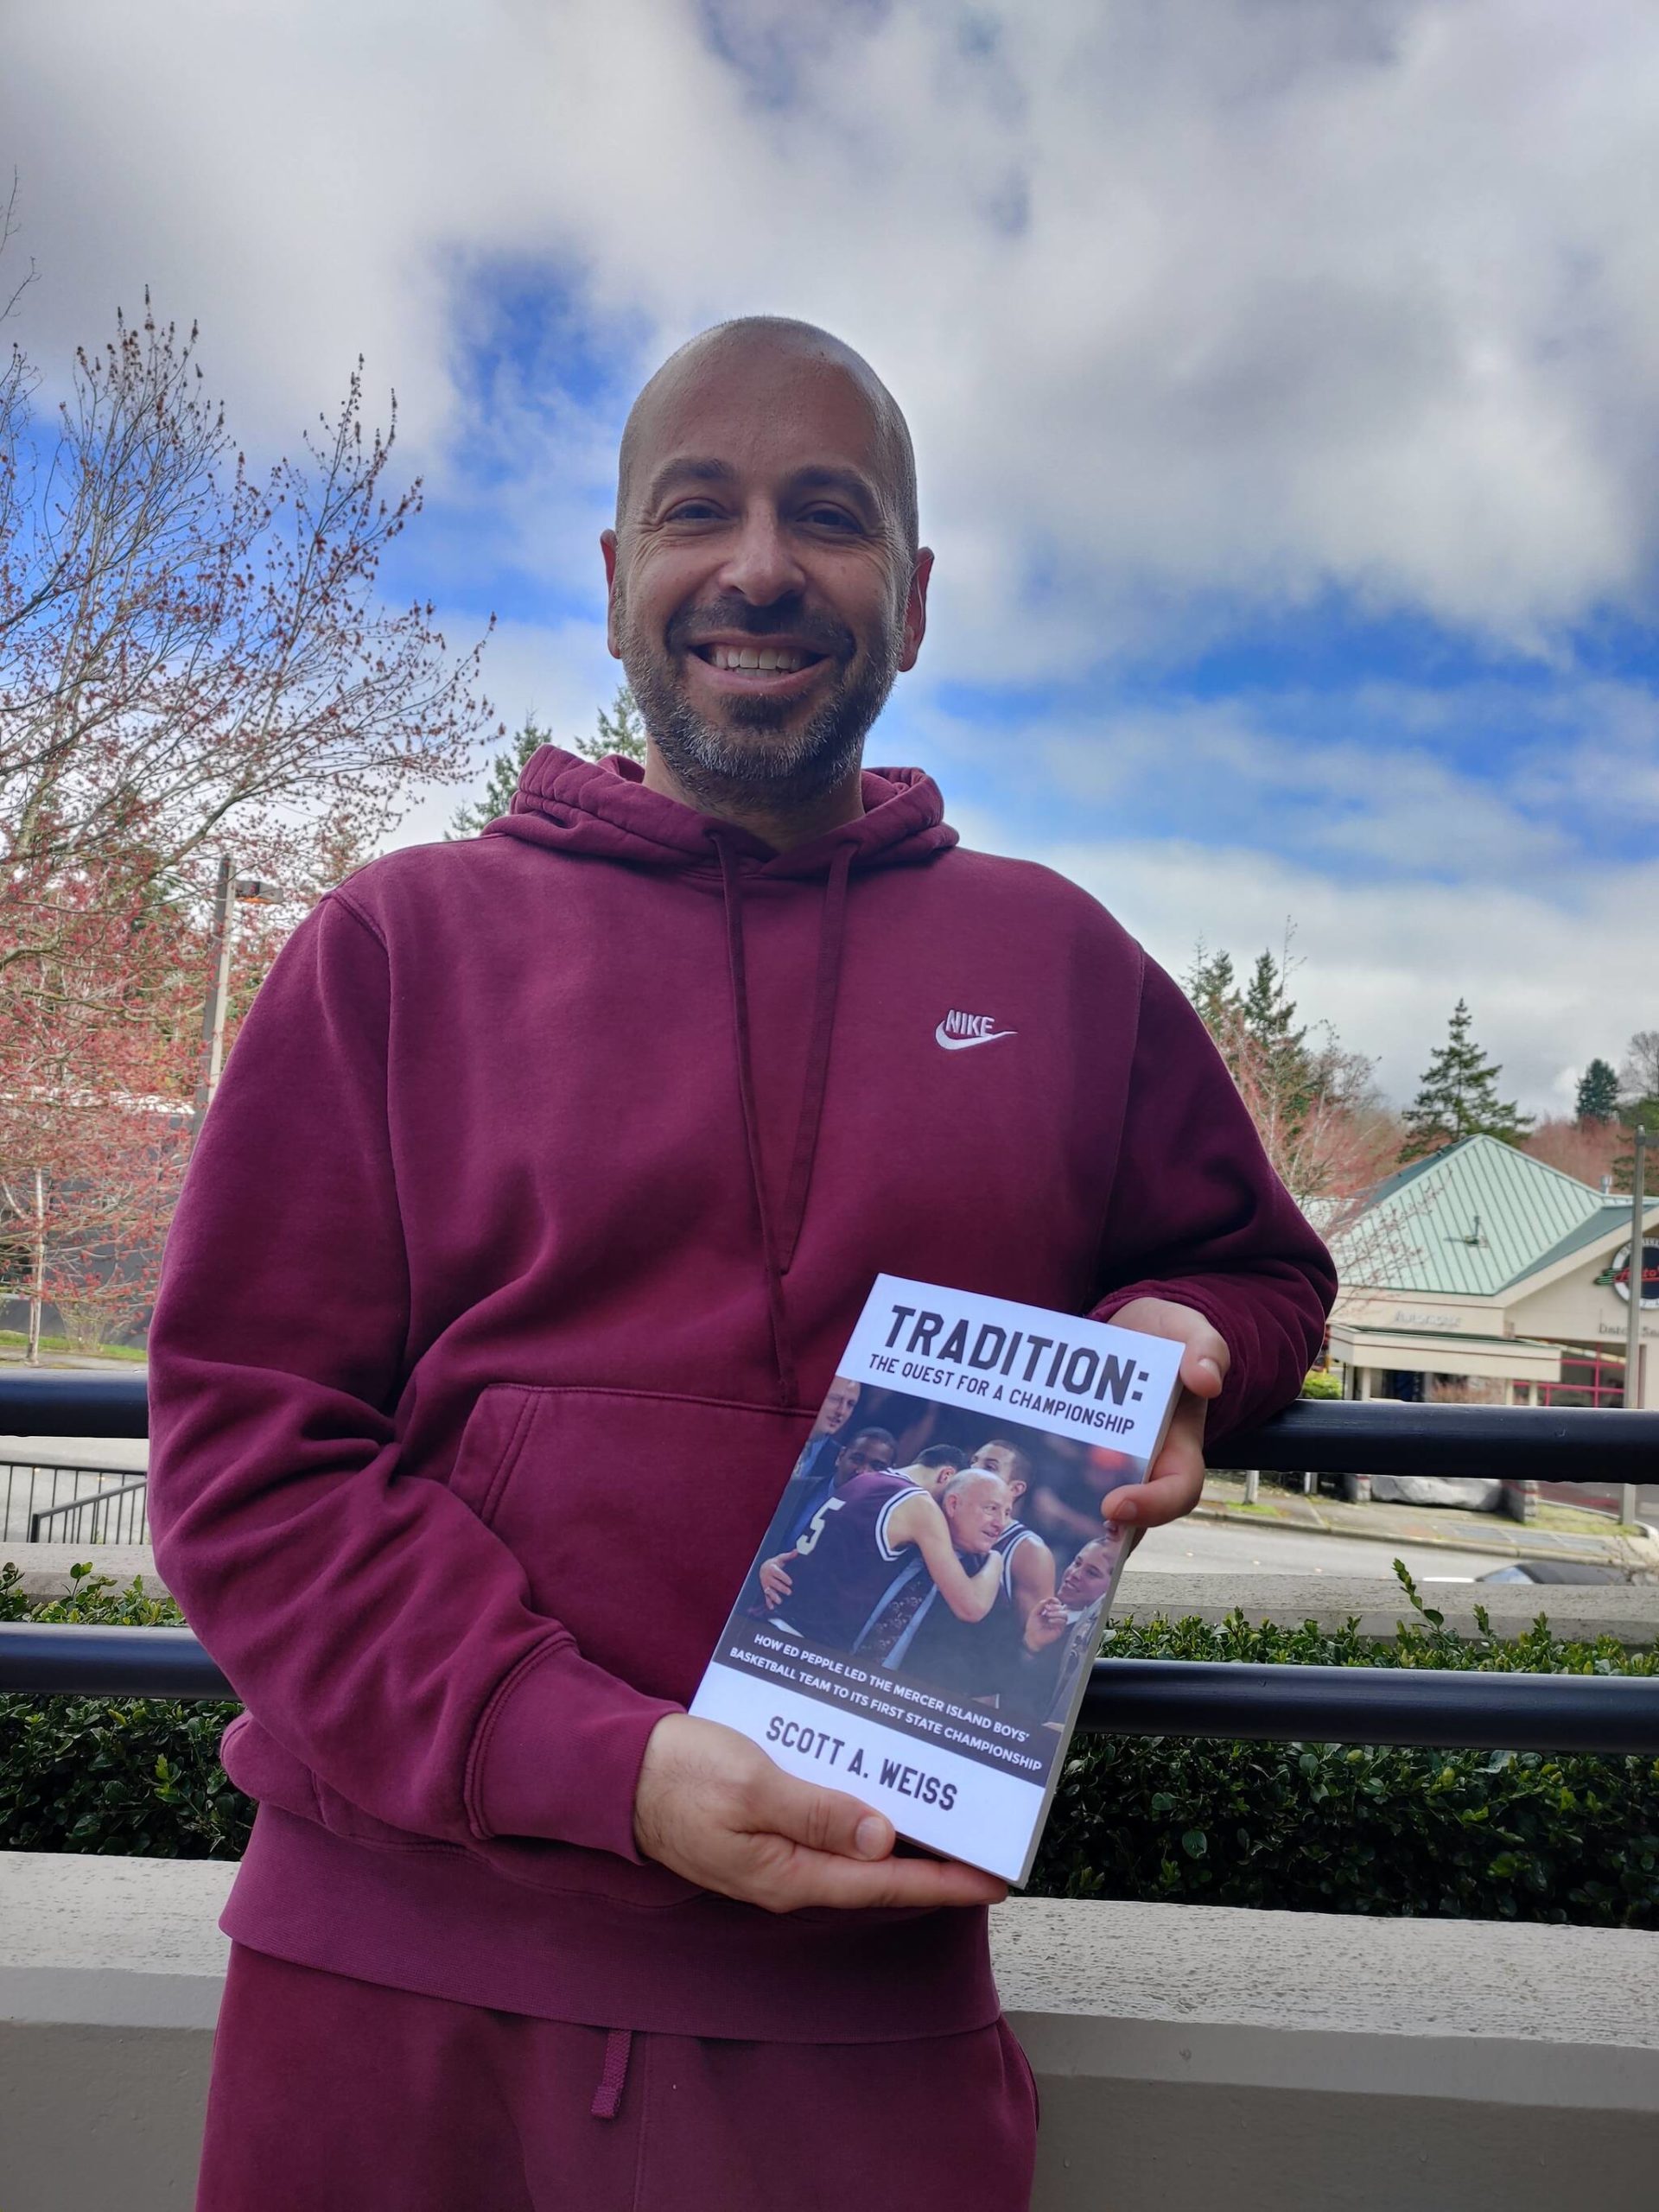 Mercer Island resident Scott A. Weiss displays his new book about legendary Islander boys basketball head coach Ed Pepple. Andy Nystrom/ staff photo